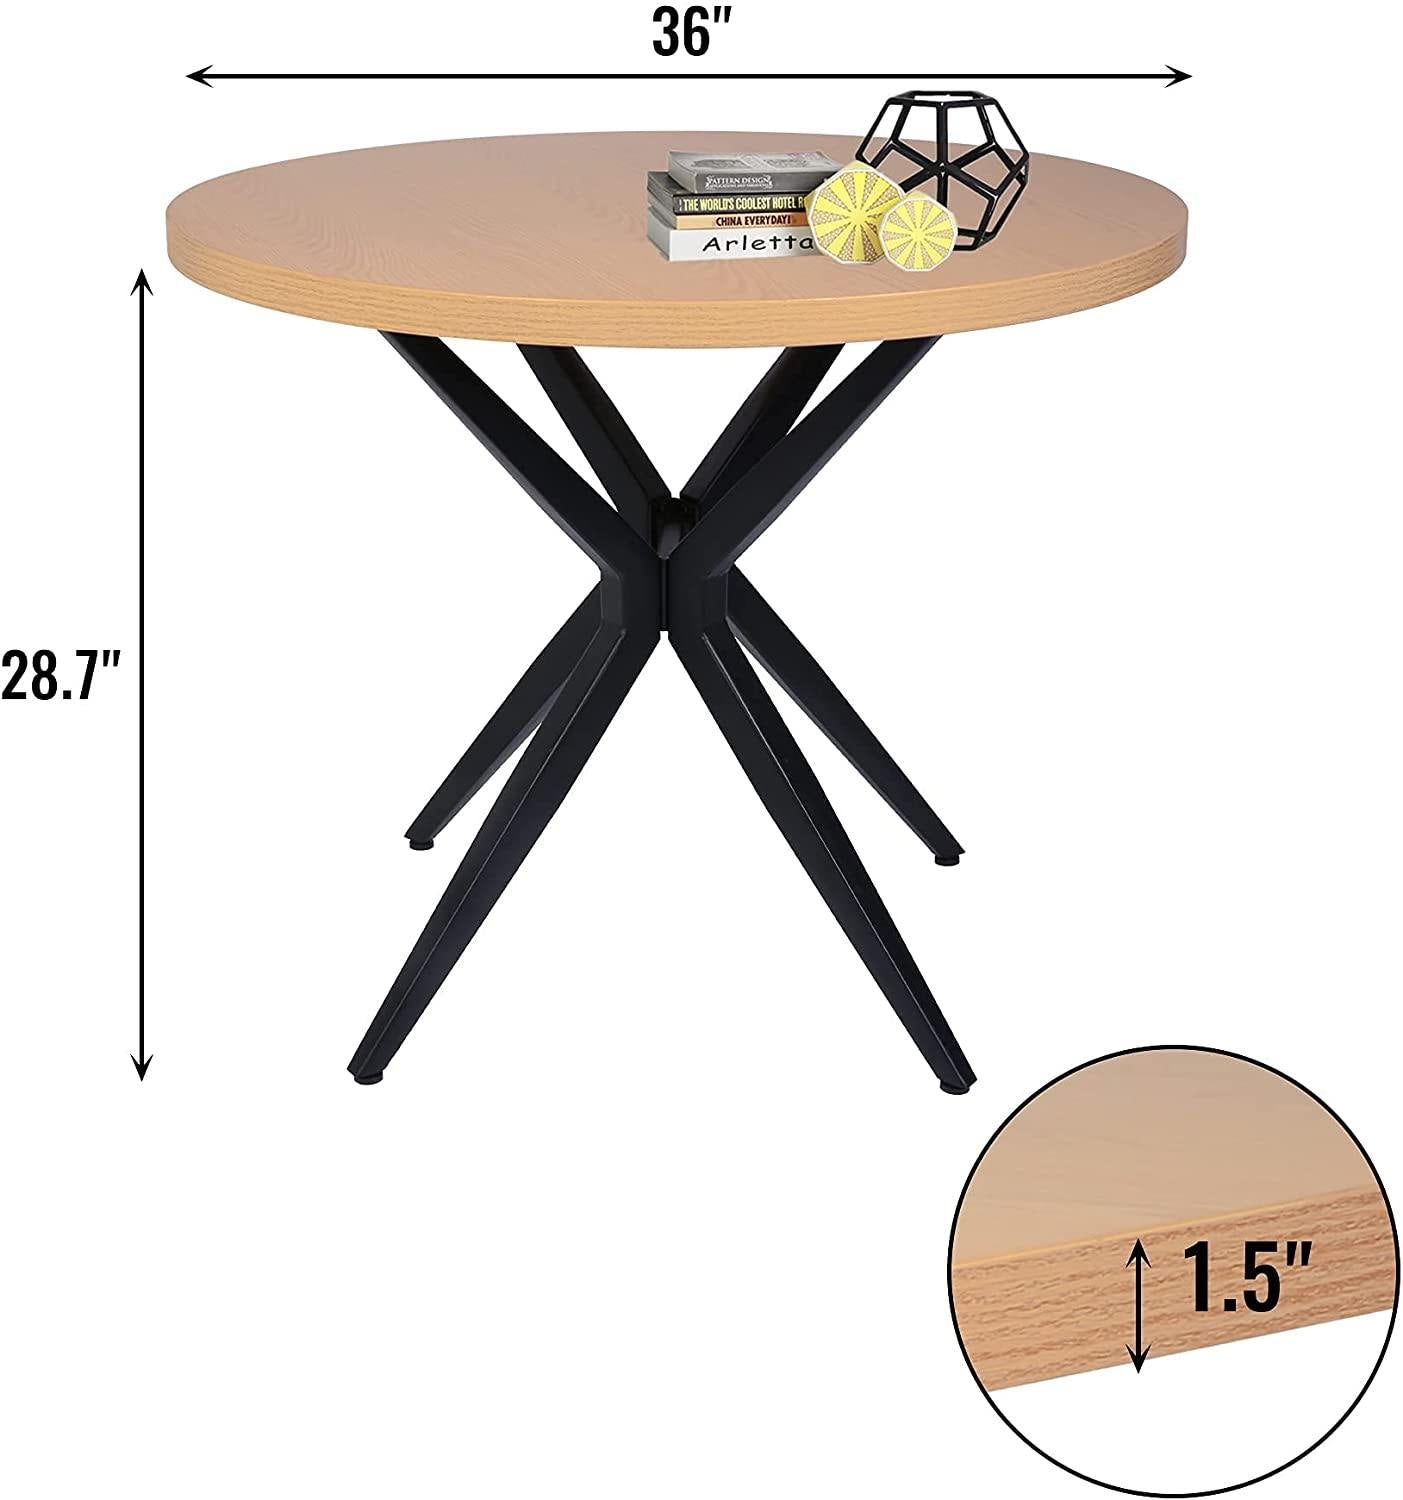 36" Round Dining Table Mid Century Modern Dining Table with Solid Metal Legs for Cafe/Bar, Kitchen, Dining, Office - Bosonshop